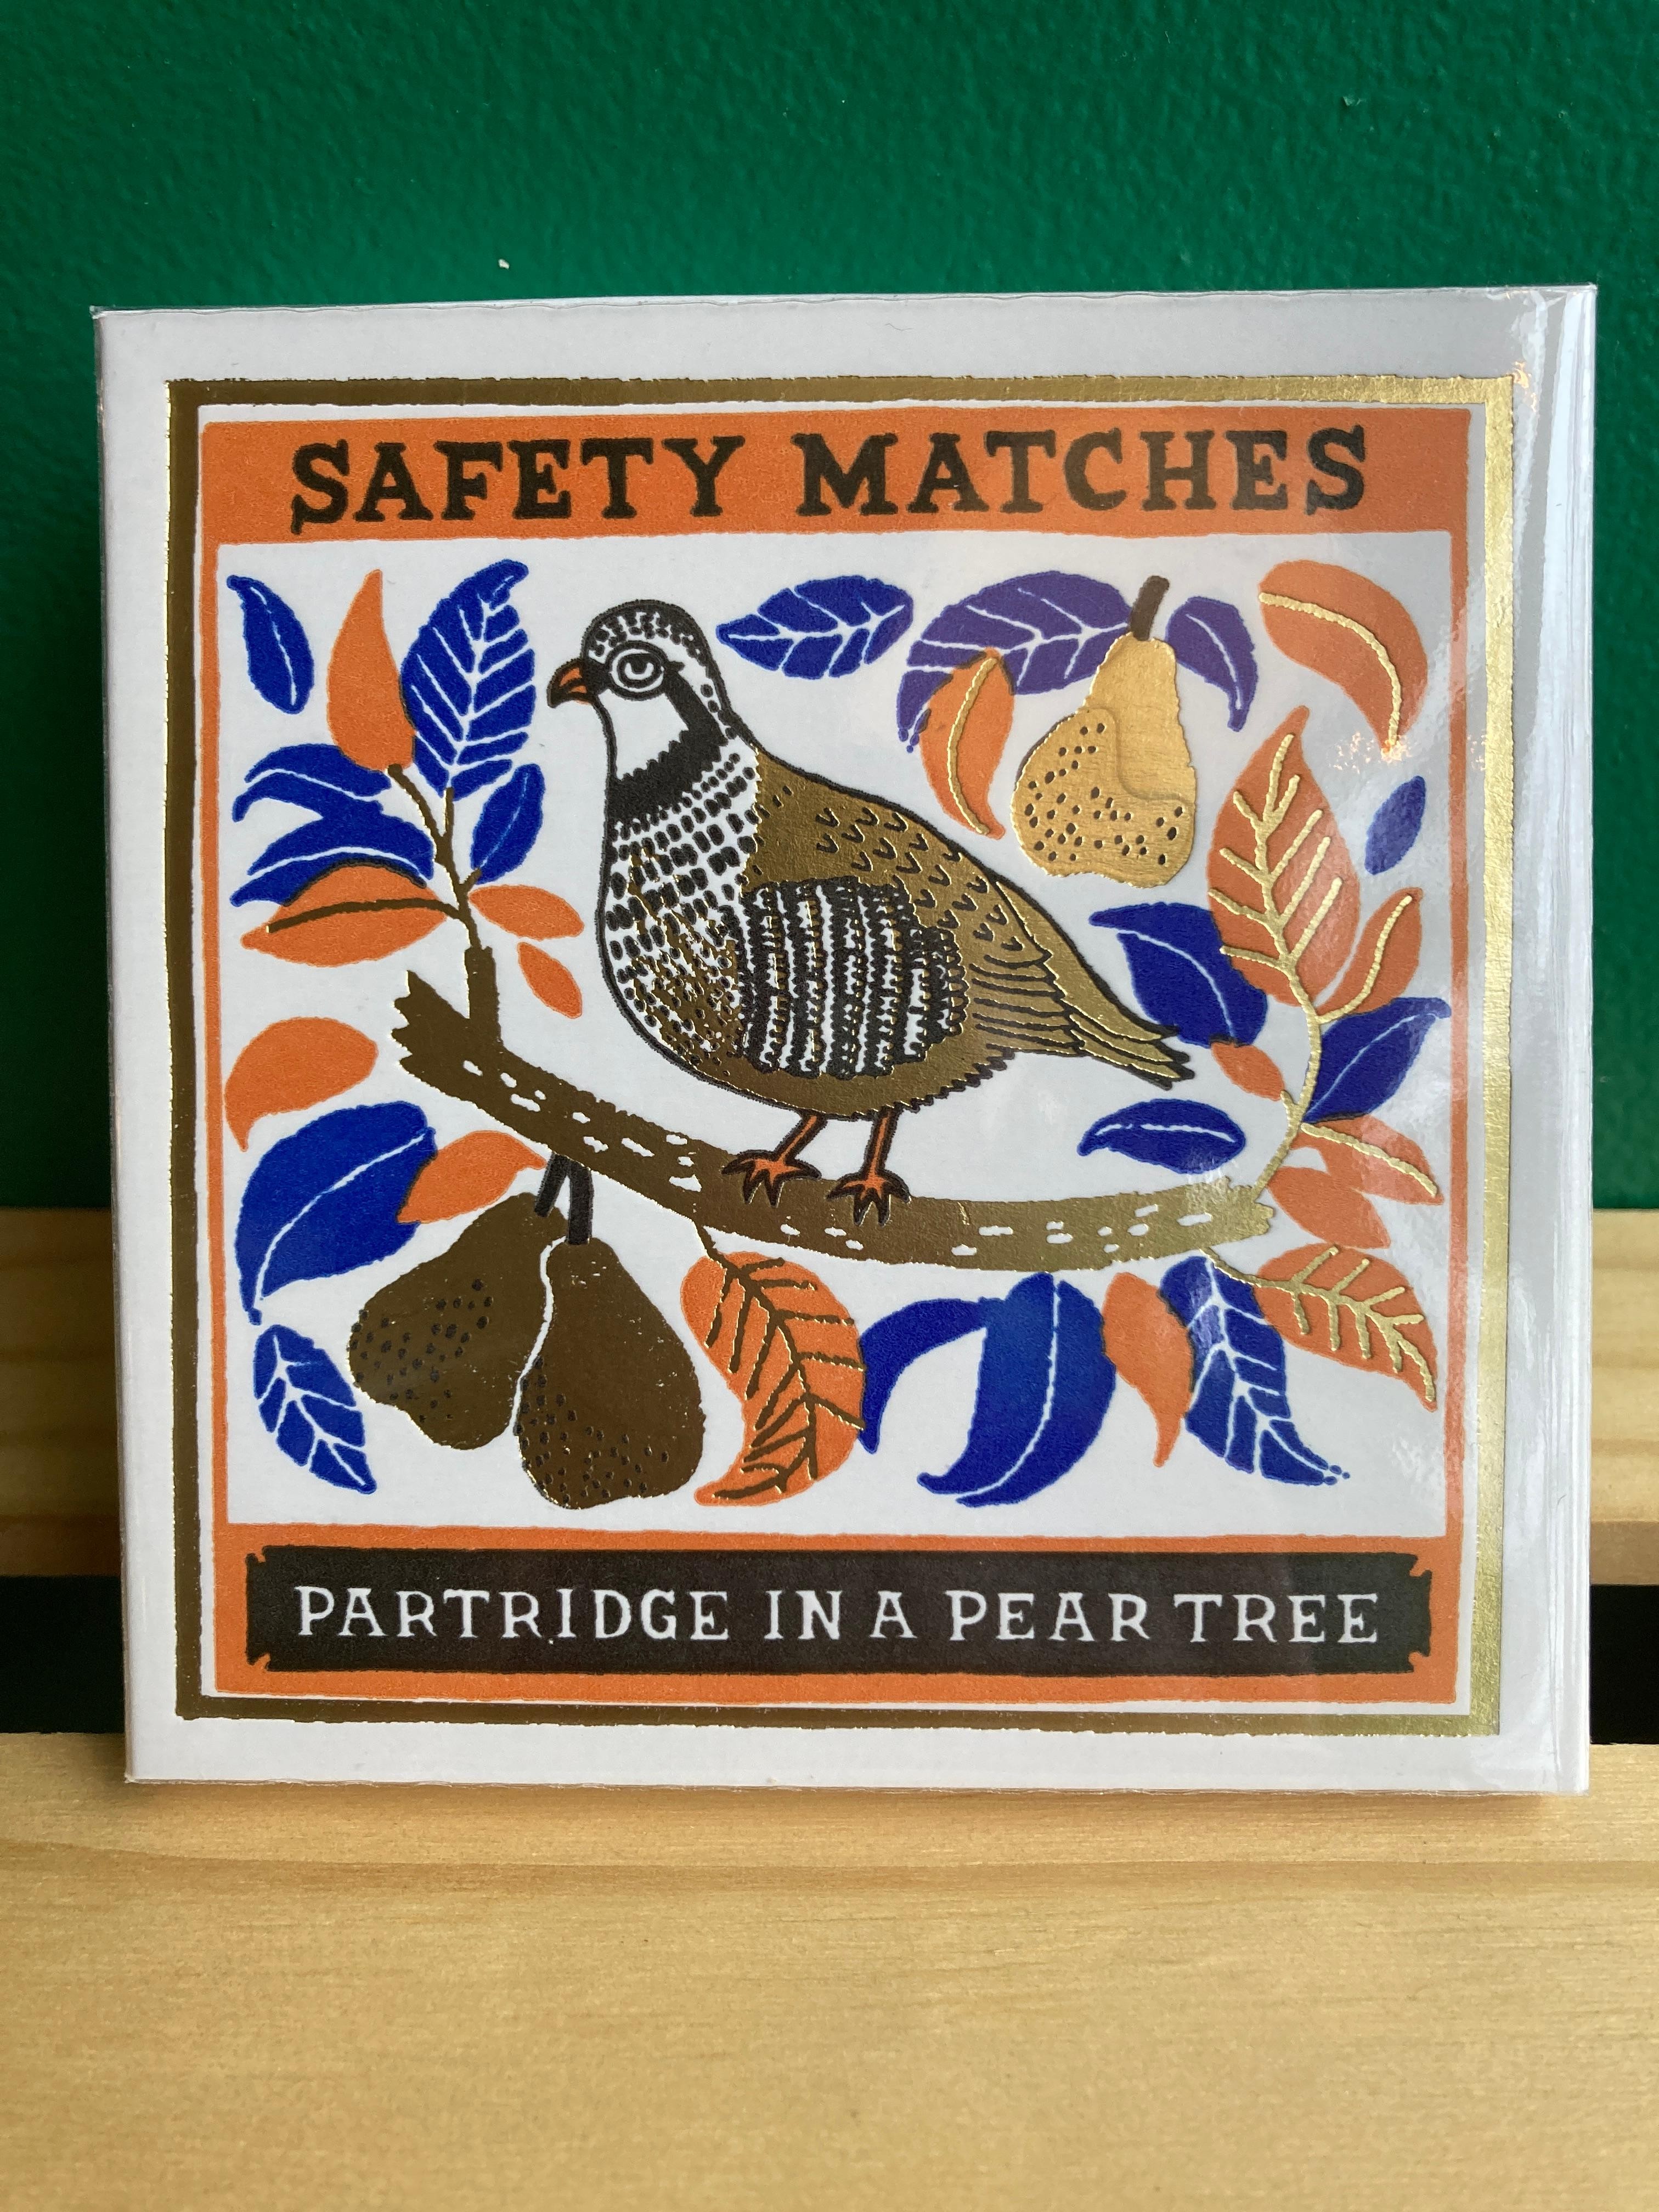 Archivist Gallery - Partridge in a Pear Tree Matchbox